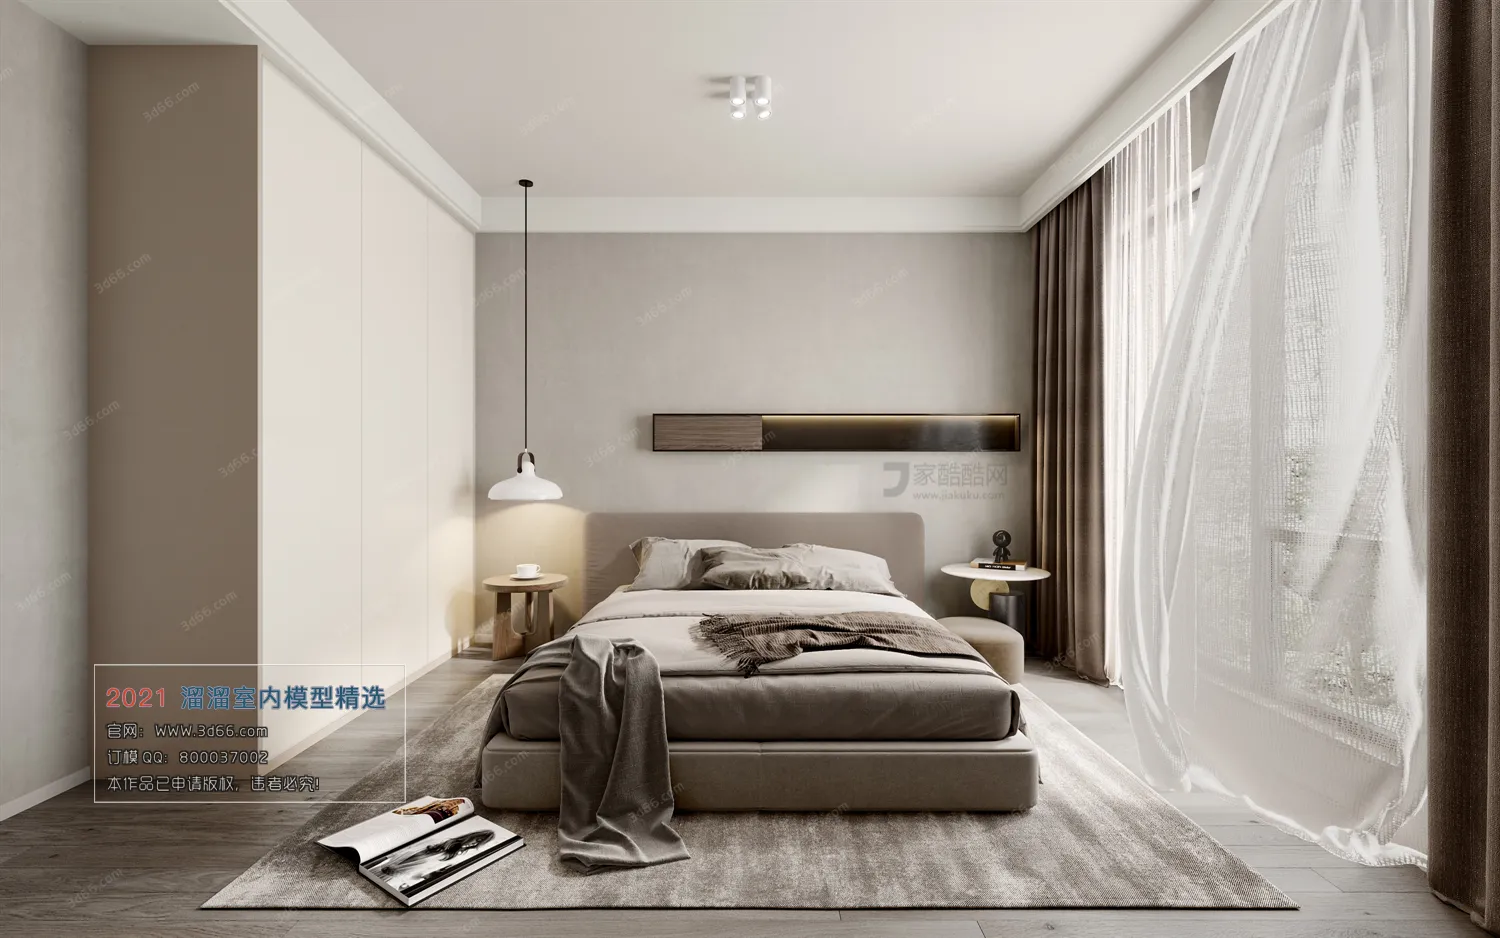 BEDROOM – A012-Modern style-Vray model